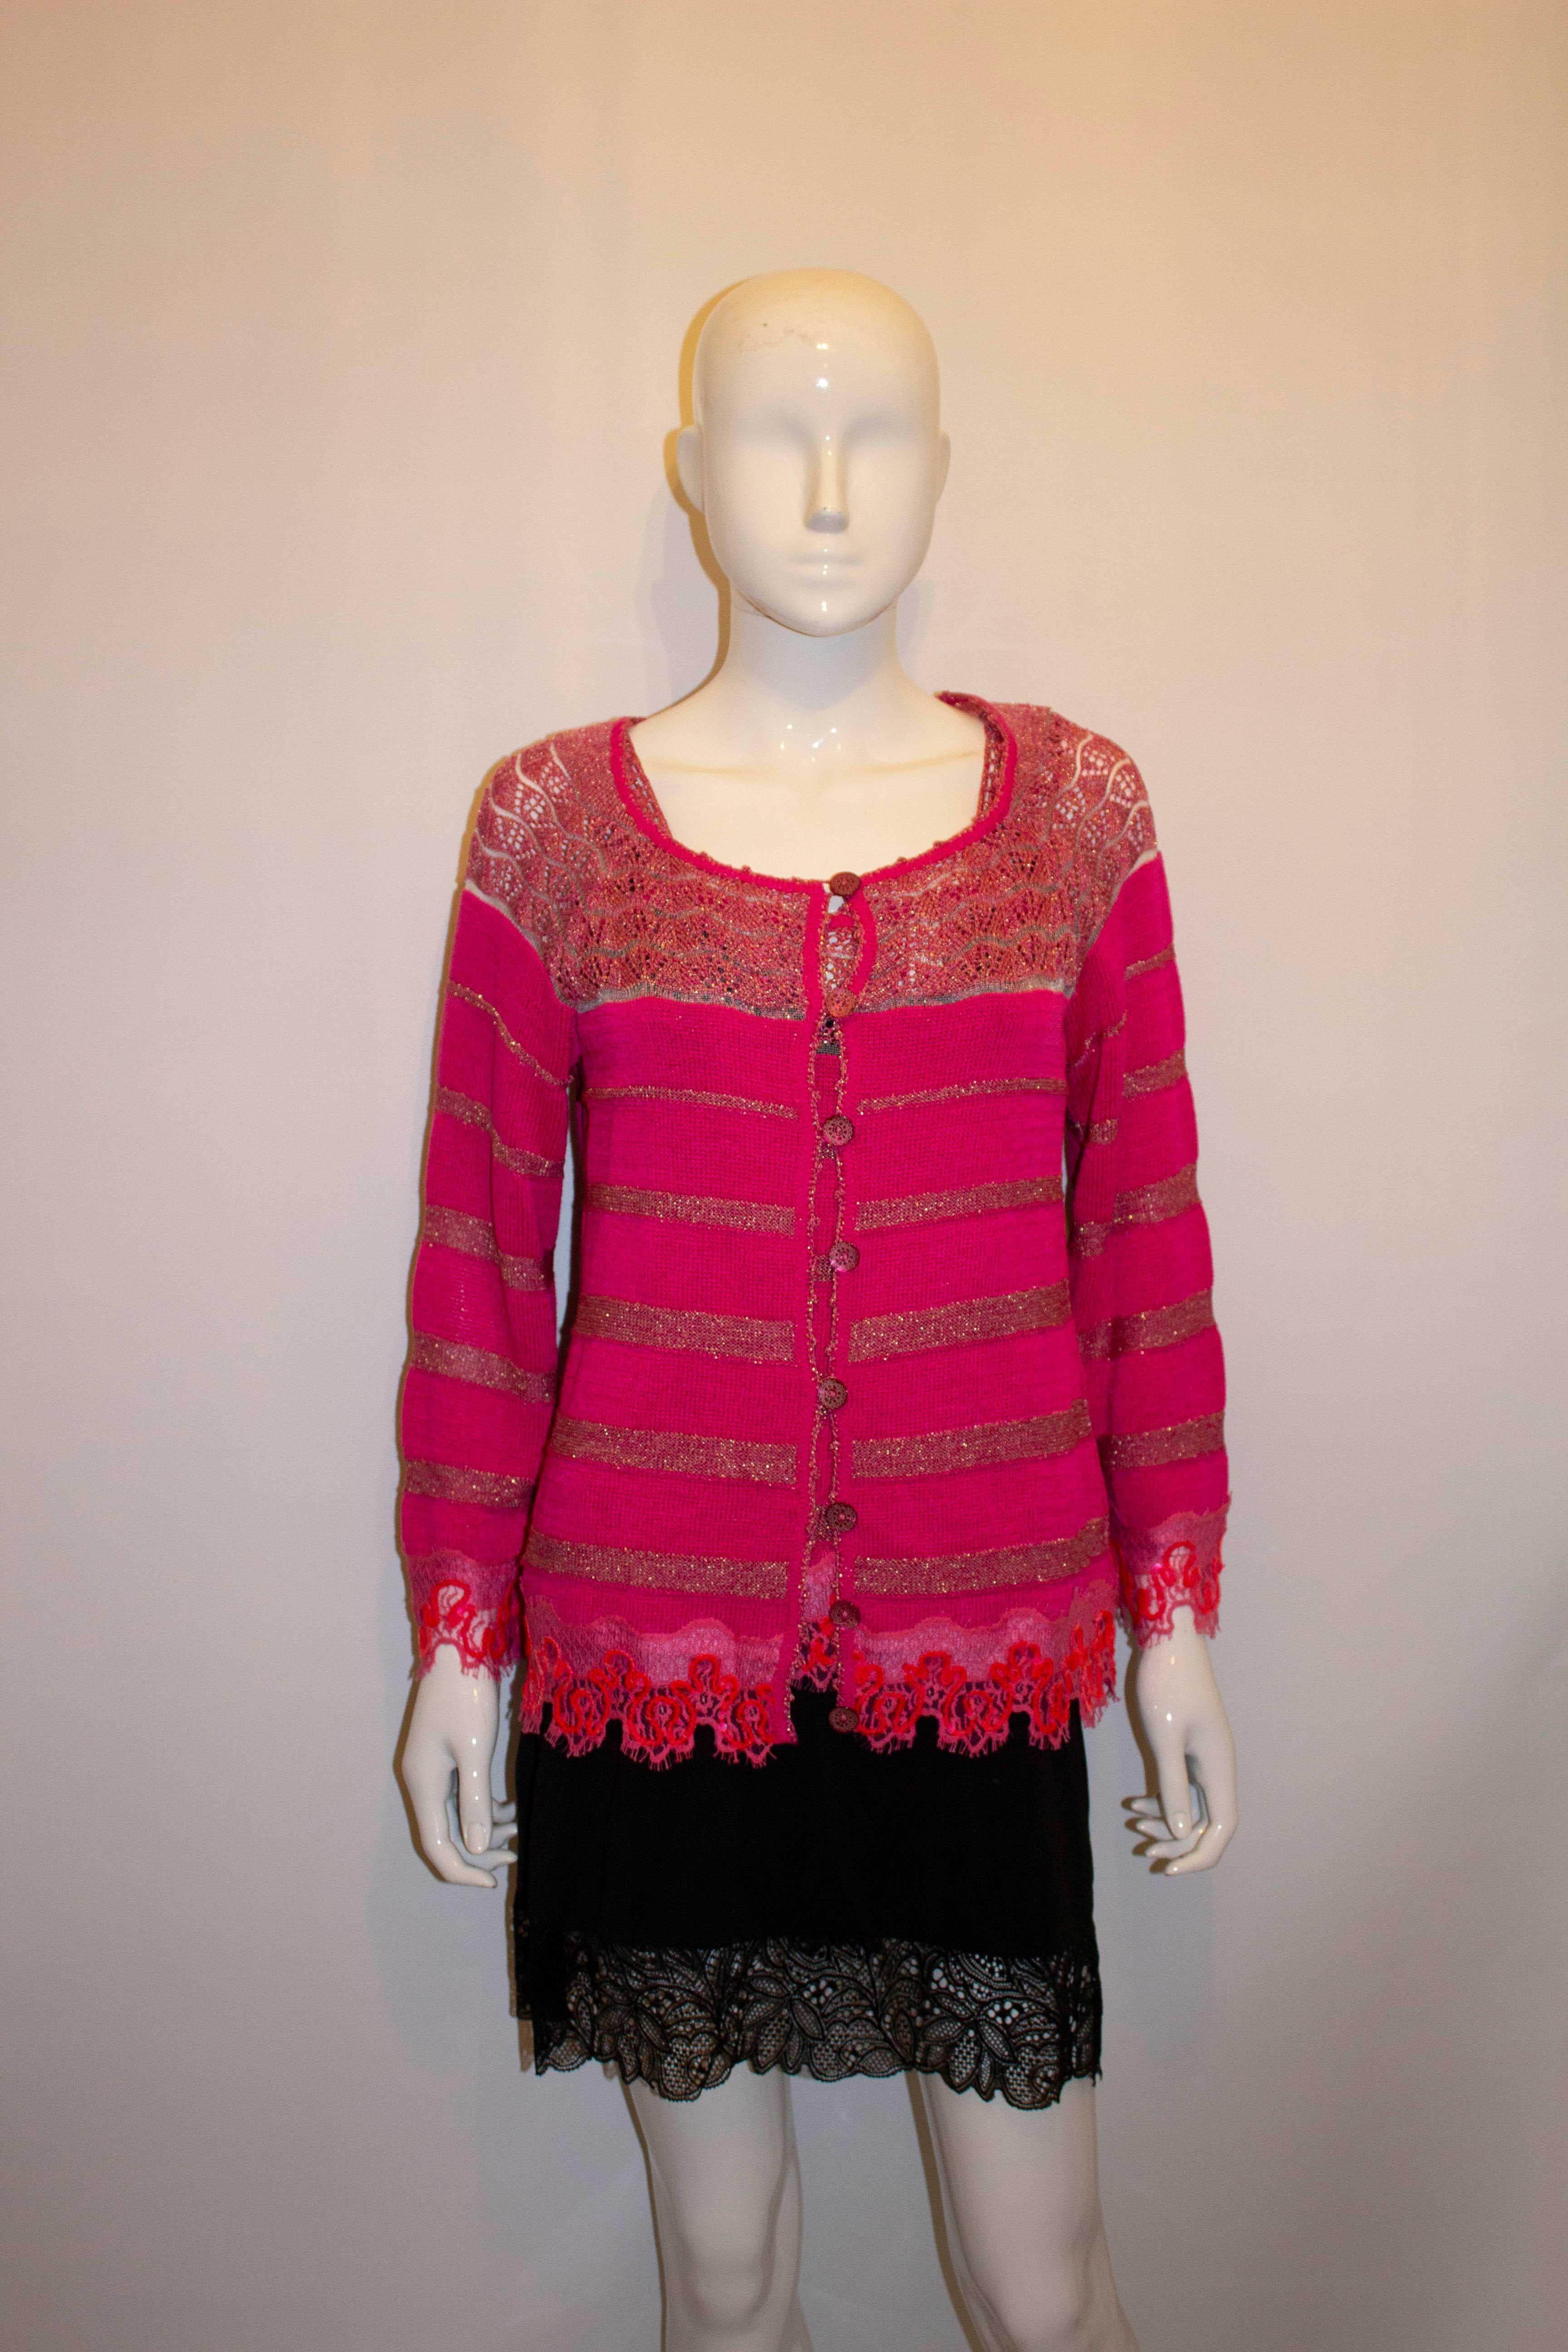 Women's Christian Lacroix Bazzar Pink Cami and Cardigan For Sale